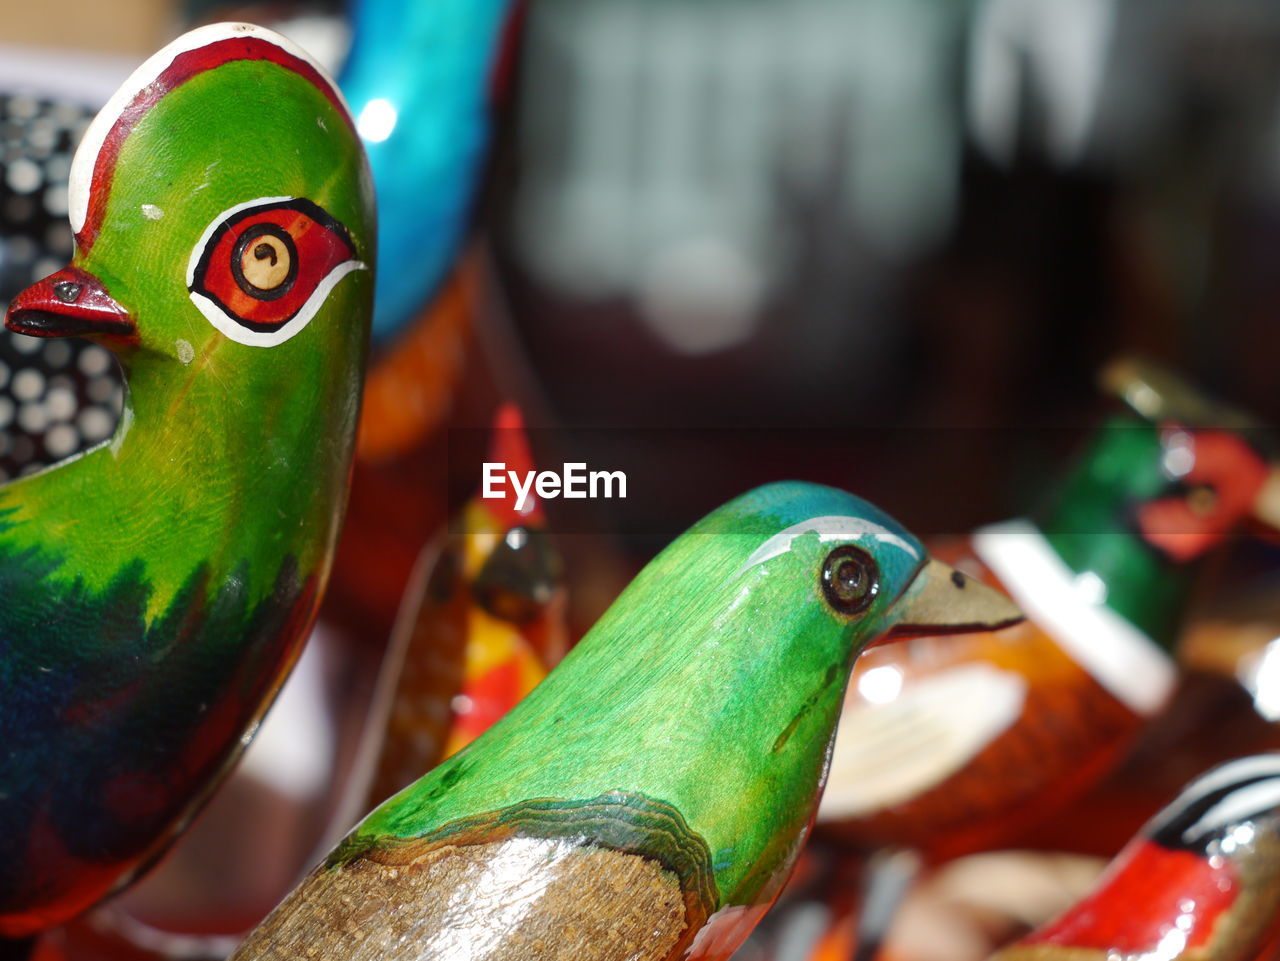 Bird figurines for sale at market stall